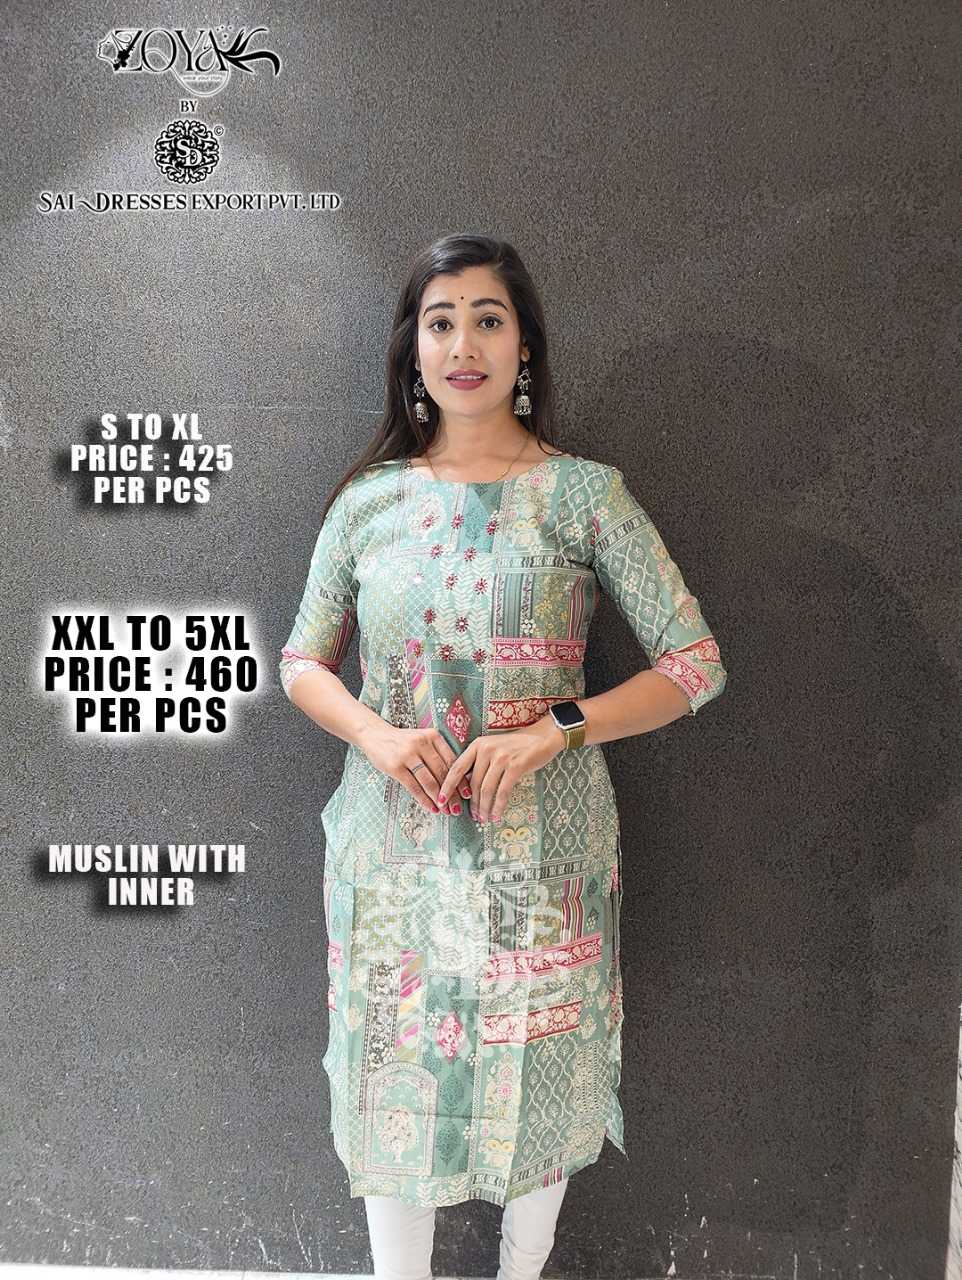 SAI DRESSES PRESENT D.NO SD80 READY TO WEAR BEAUTIFUL MUSLIN PRINTED STRAIGHT KURTI COMBO COLLECTION IN WHOLESALE RATE IN SURAT